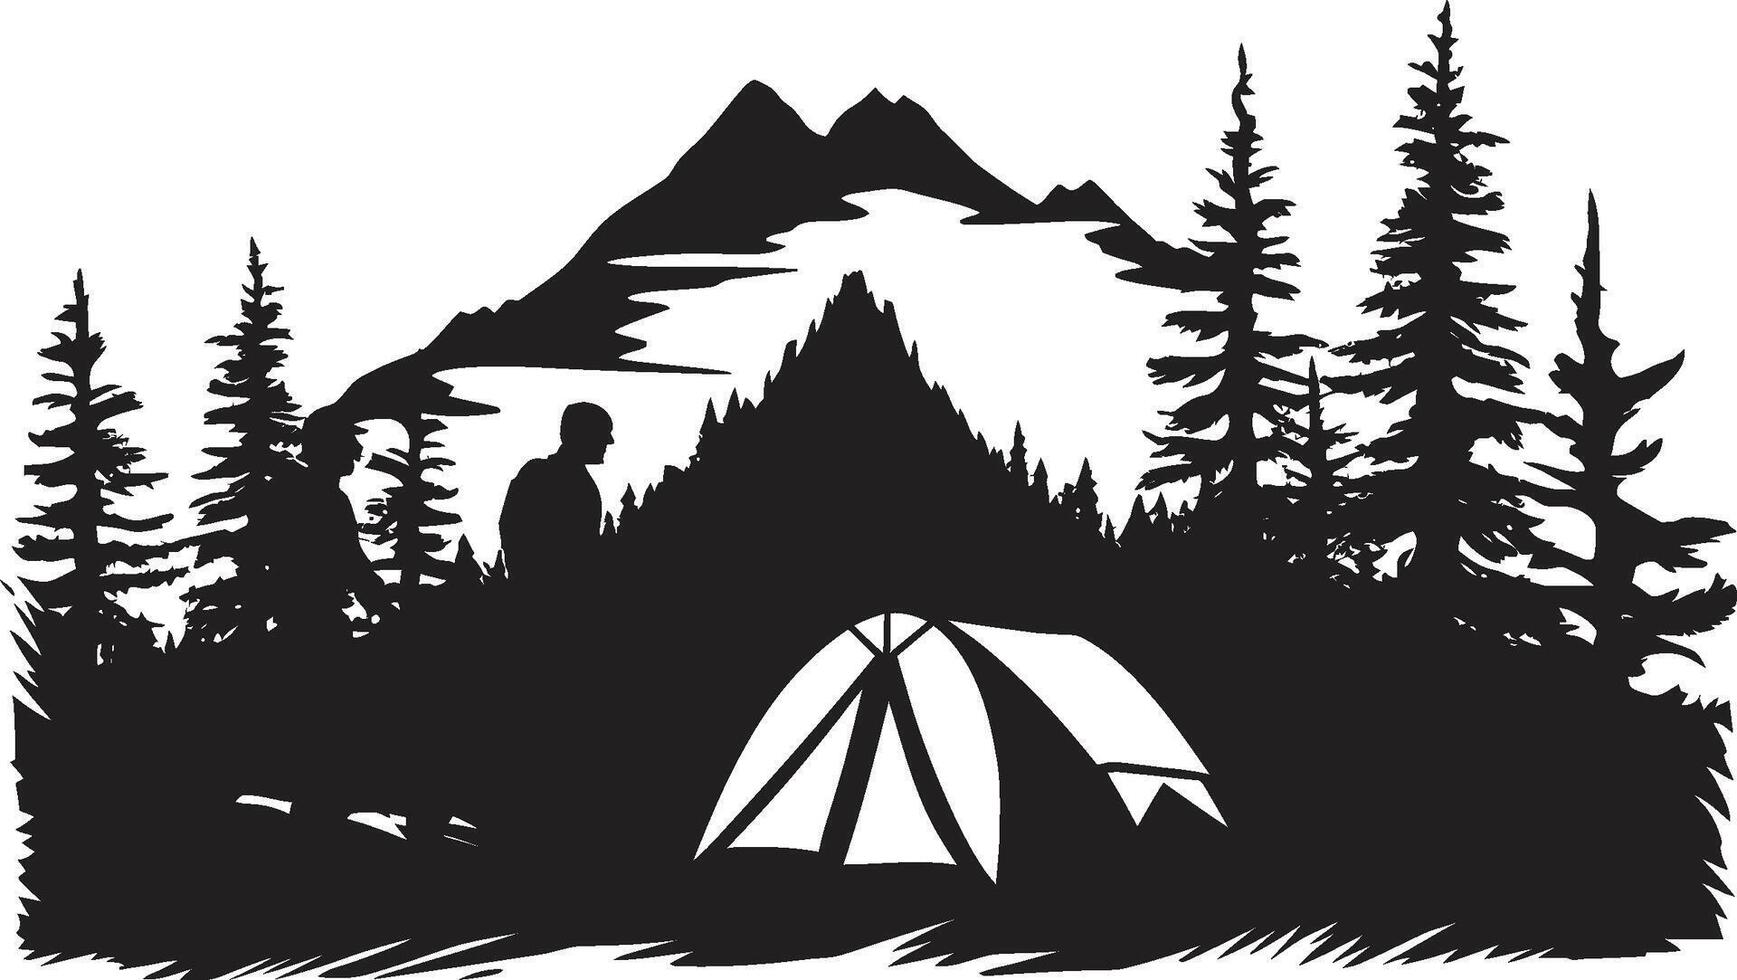 Into the Wild Sleek Black Icon with Vector Camping Logo Design Rustic Retreat Monochrome Vector Logo for Outdoor Bliss